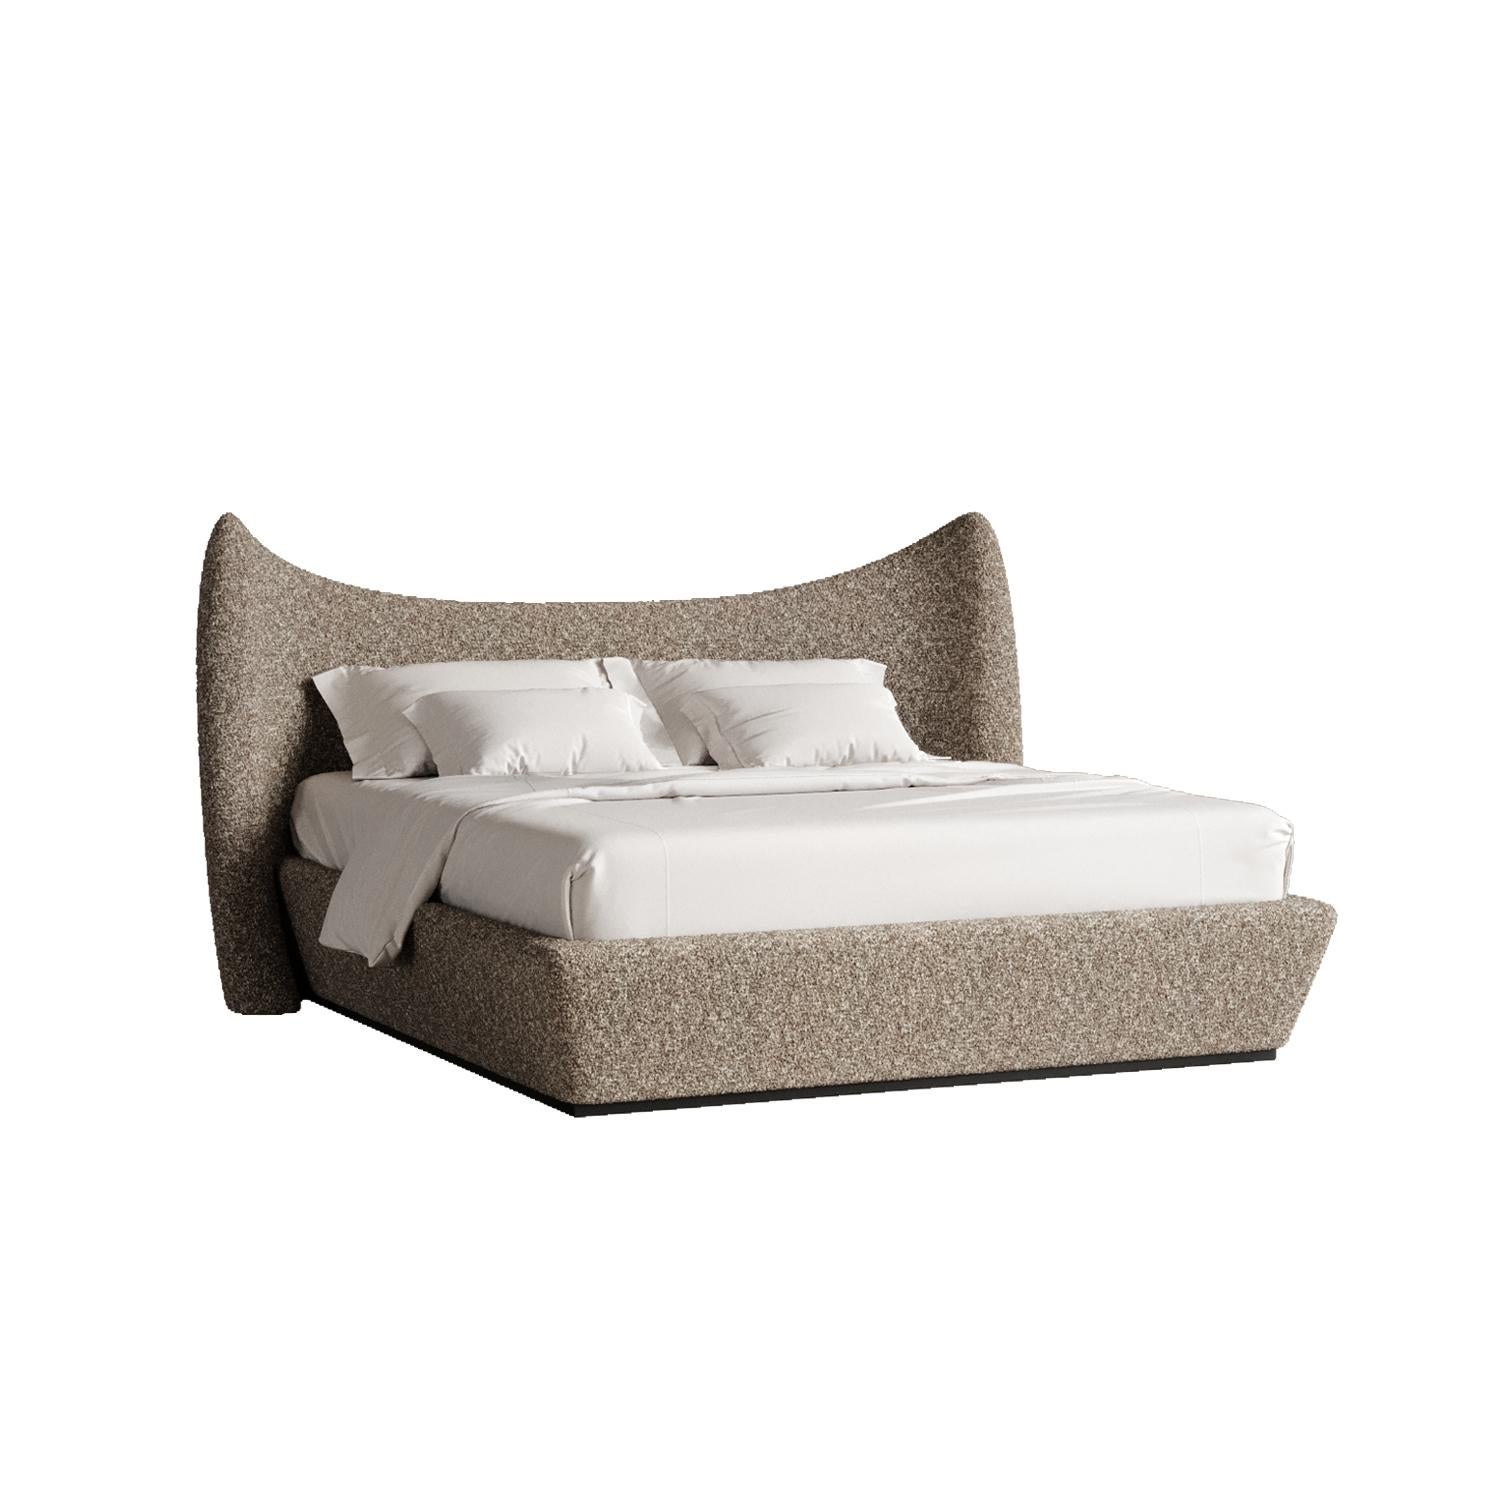 Chocolate Memory Bed by Plyus Design
Dimensions: D 235 x W 265 x H 125 cm
Materials:  Wood, HR foam, polyester wadding, fabric upholstery
Also available in a variety of colors. 

“Memory” Bed.
Collection 